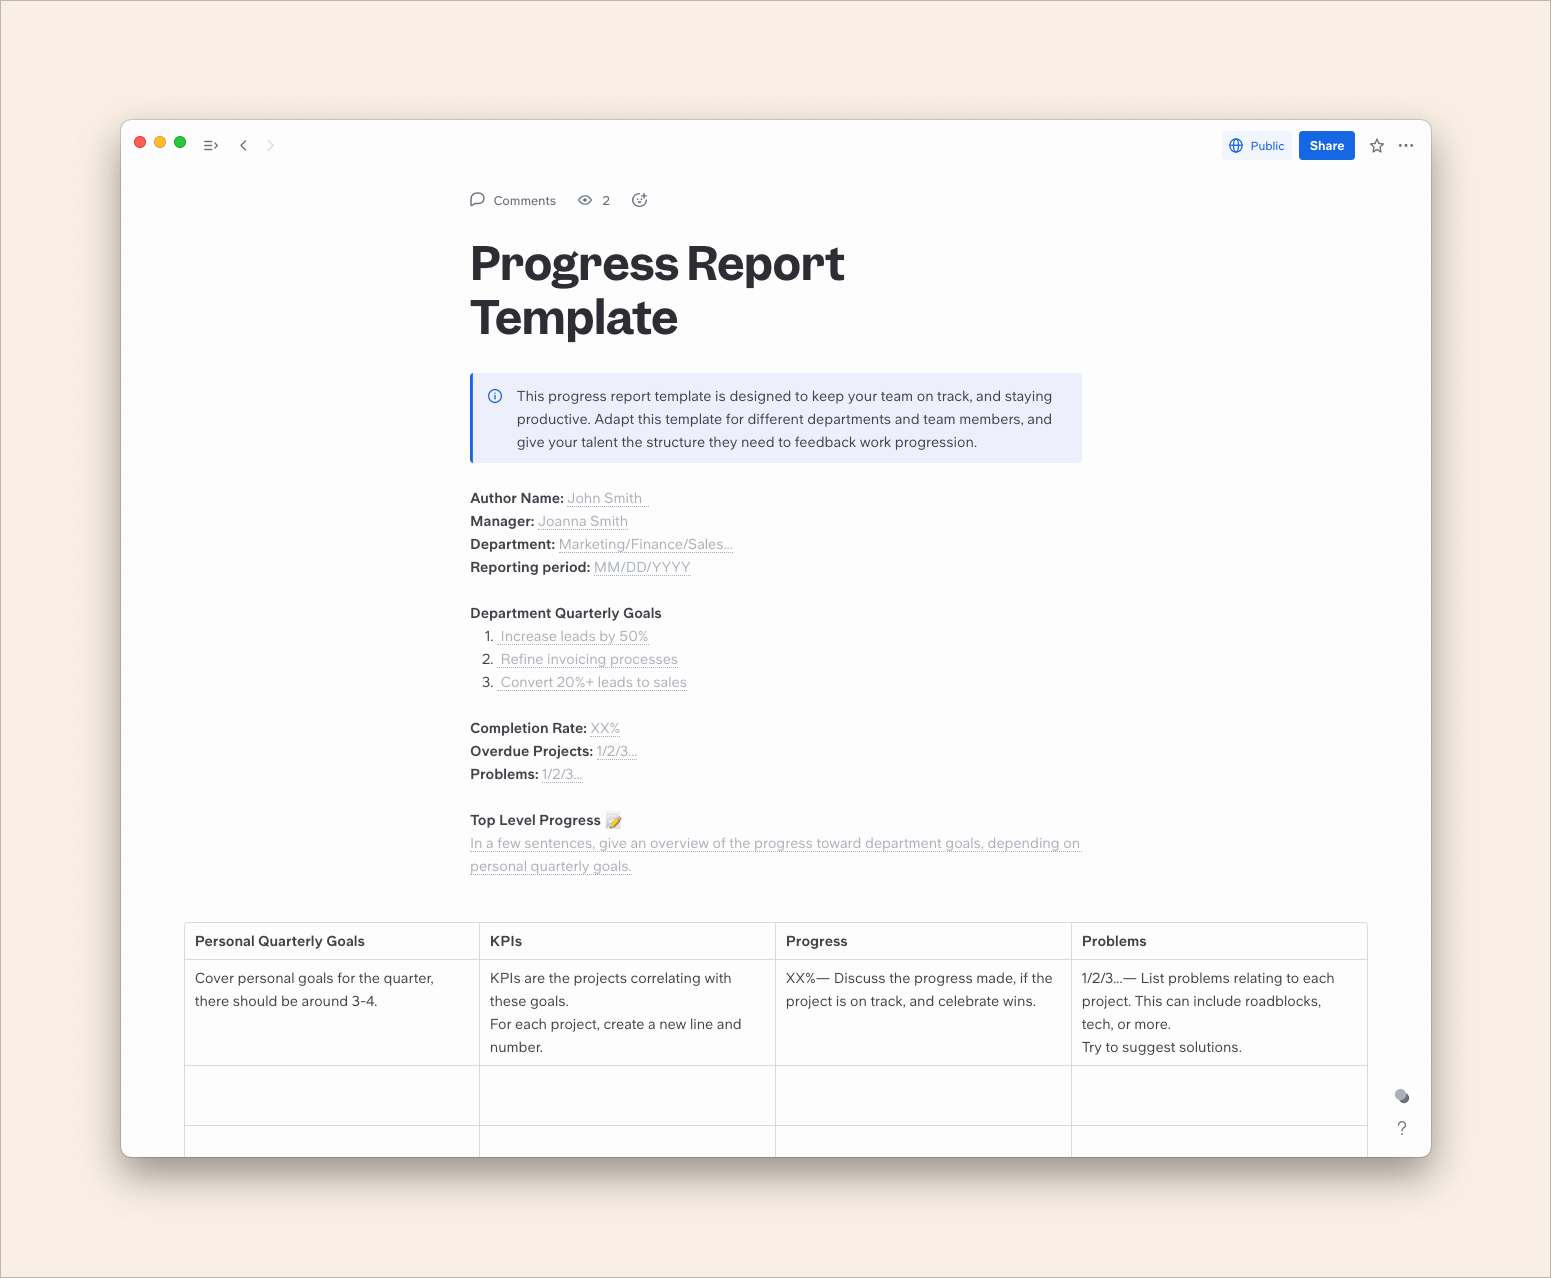 How to Write a Progress Report: A Step-by-Step Guide